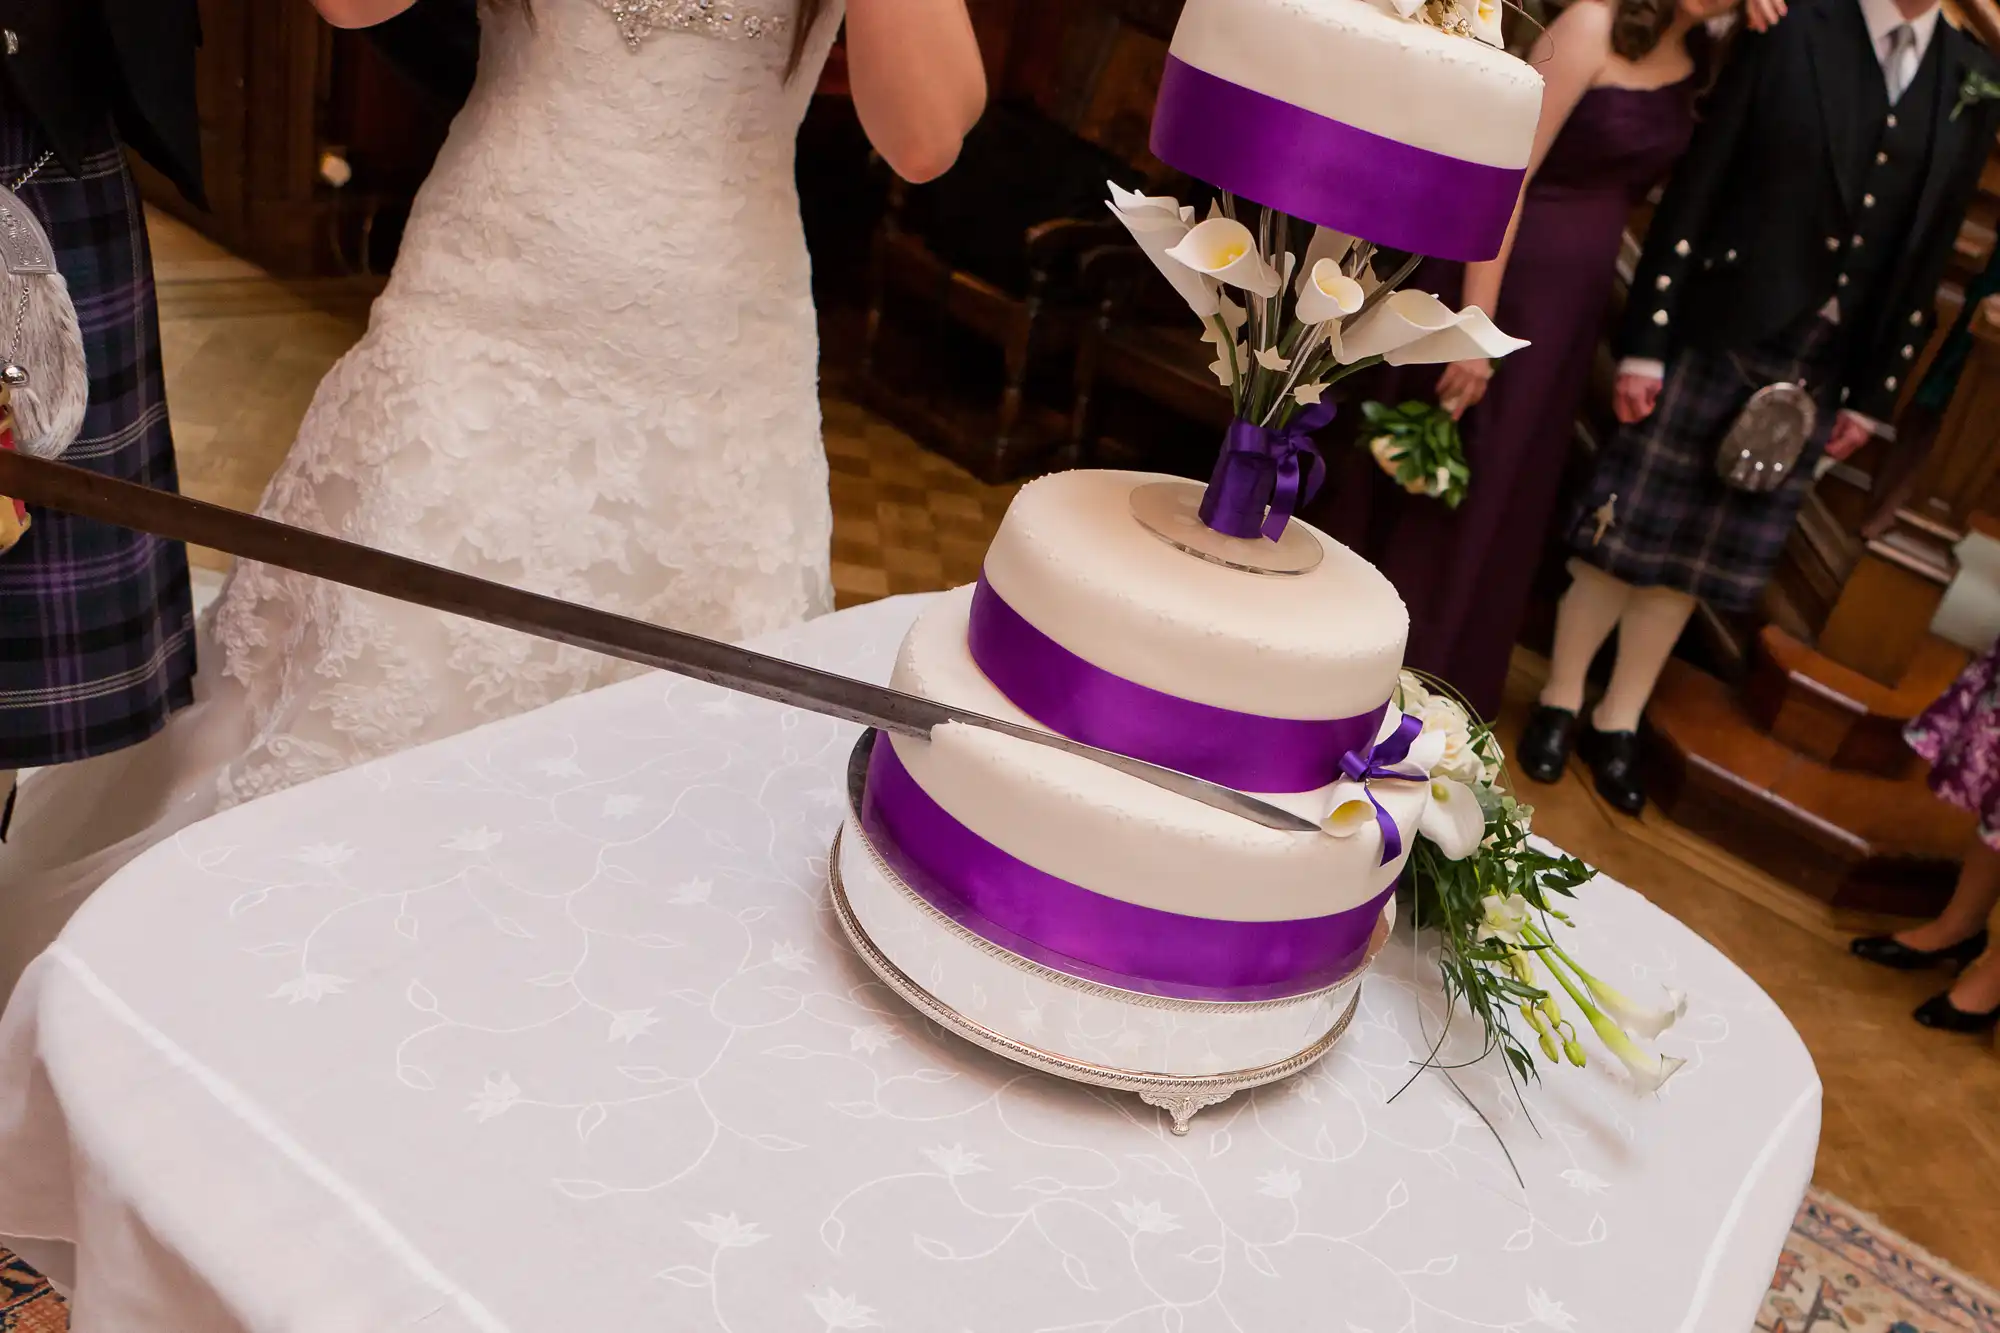 A newlywed couple cutting a three-tier wedding cake with purple ribbons and white floral decorations at a reception.